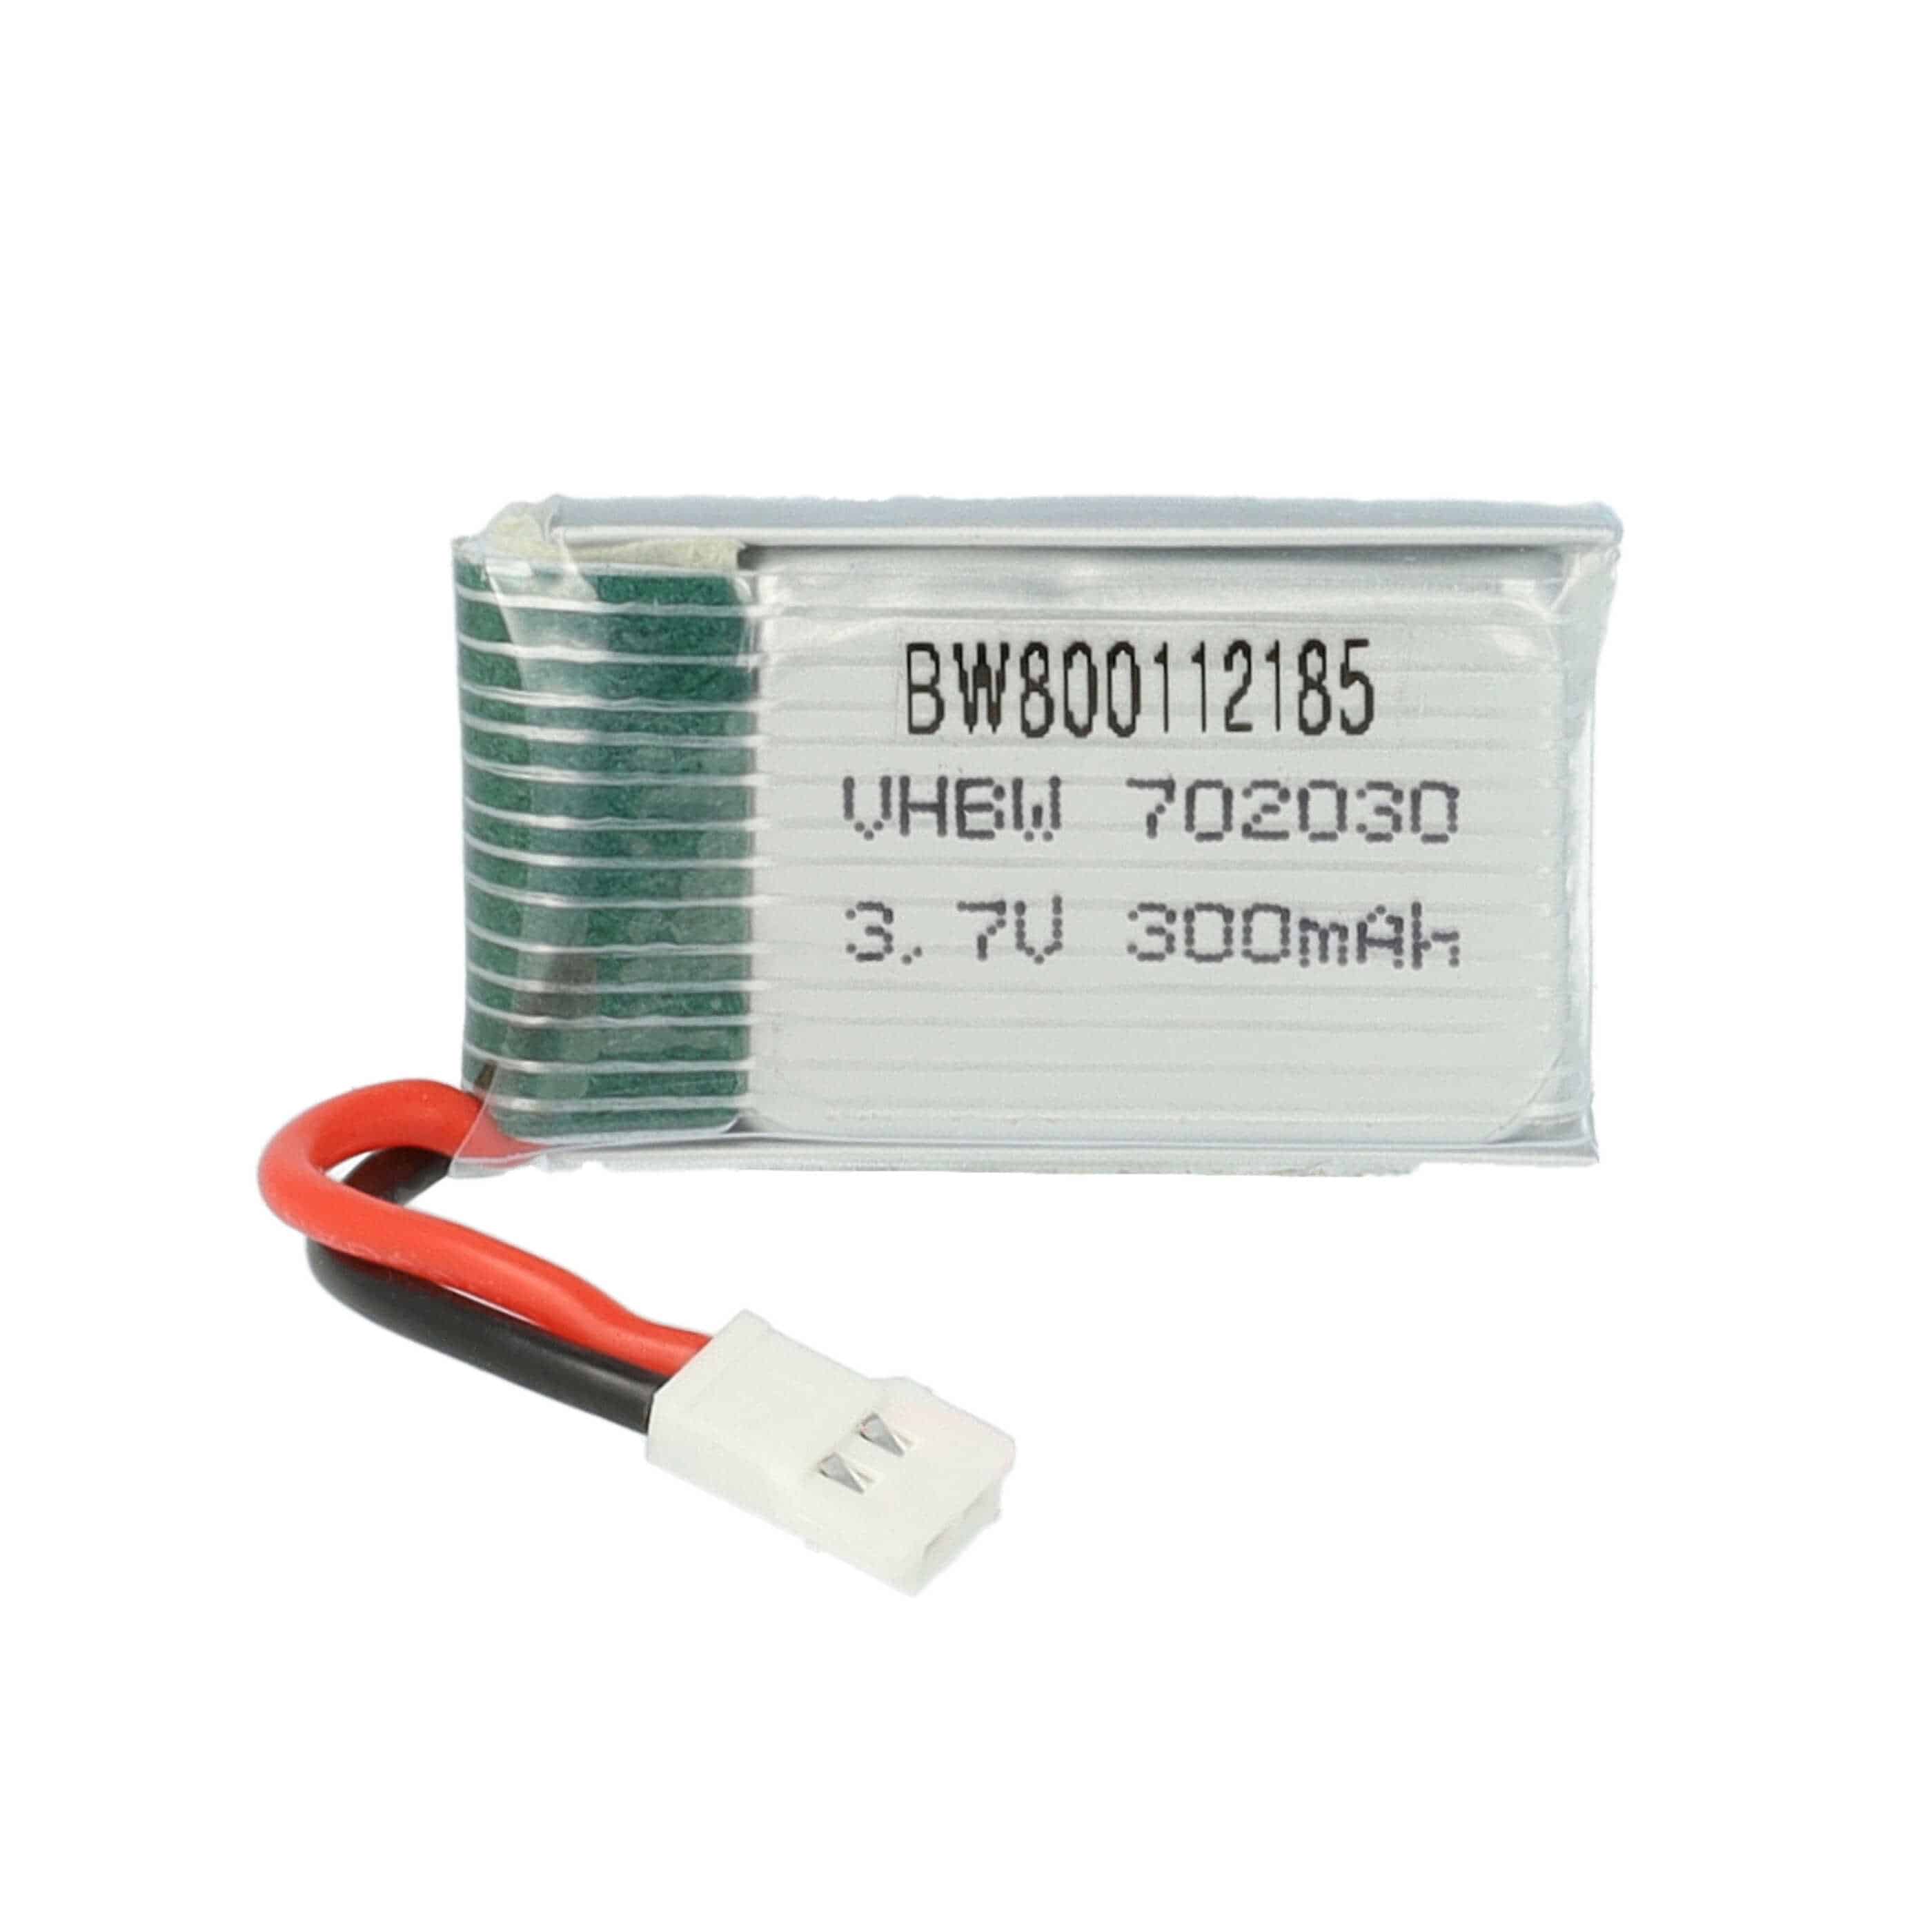 Drone Battery Replacement for Revell 43935 - 300mAh 3.7V Li-polymer